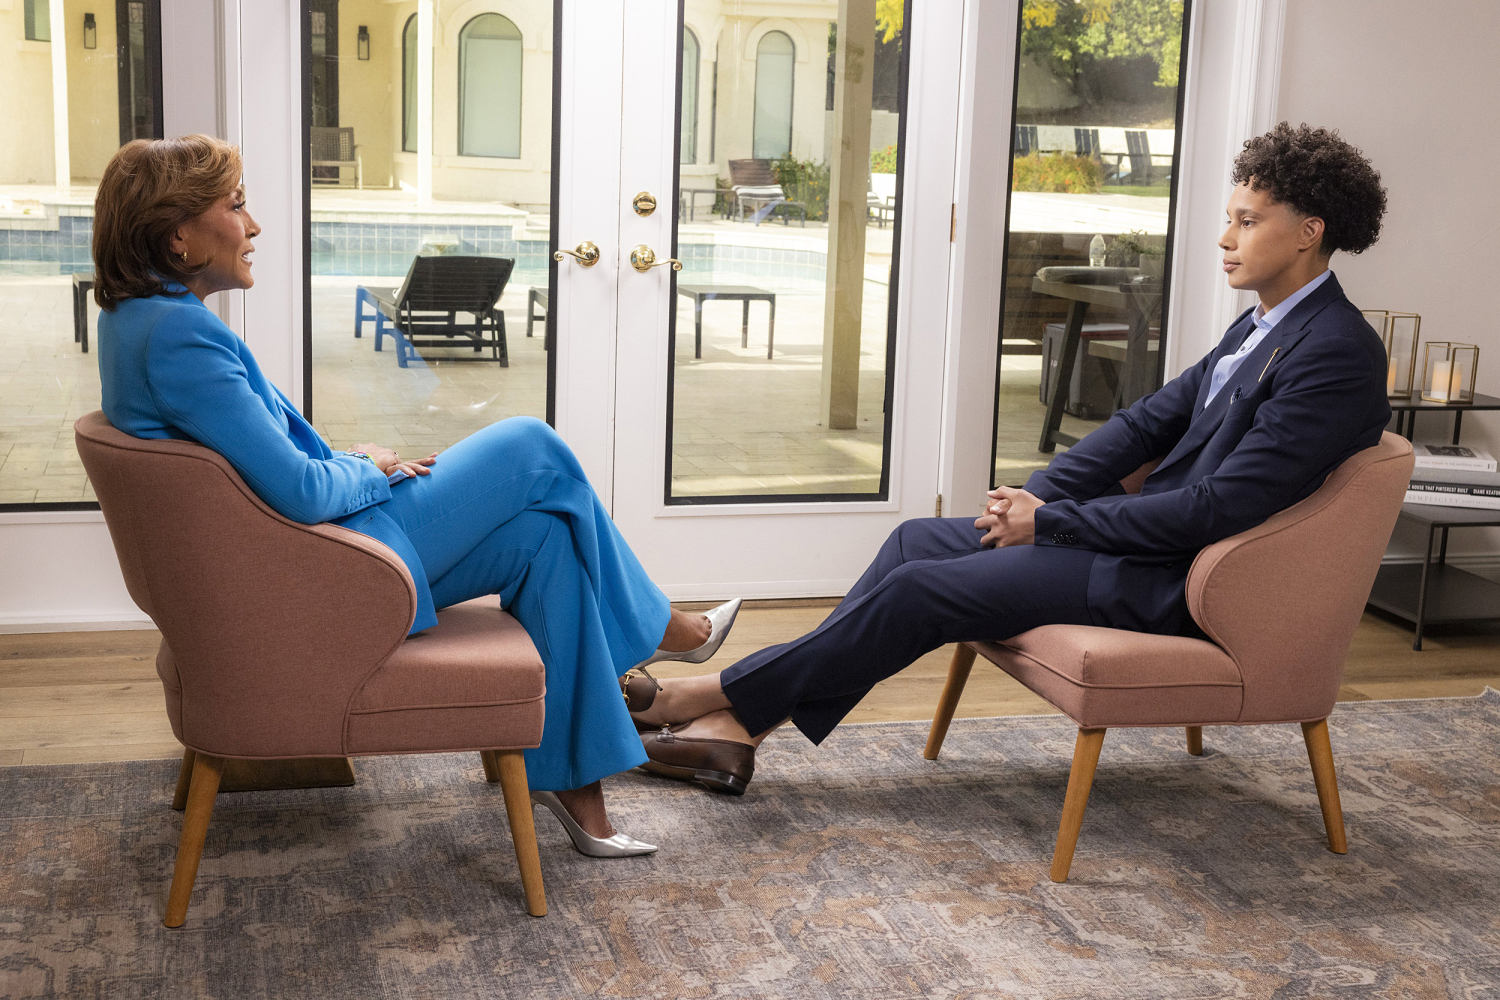 Brittney Griner reveals harsh Russian prison conditions, suicidal thoughts in Robin Roberts interview